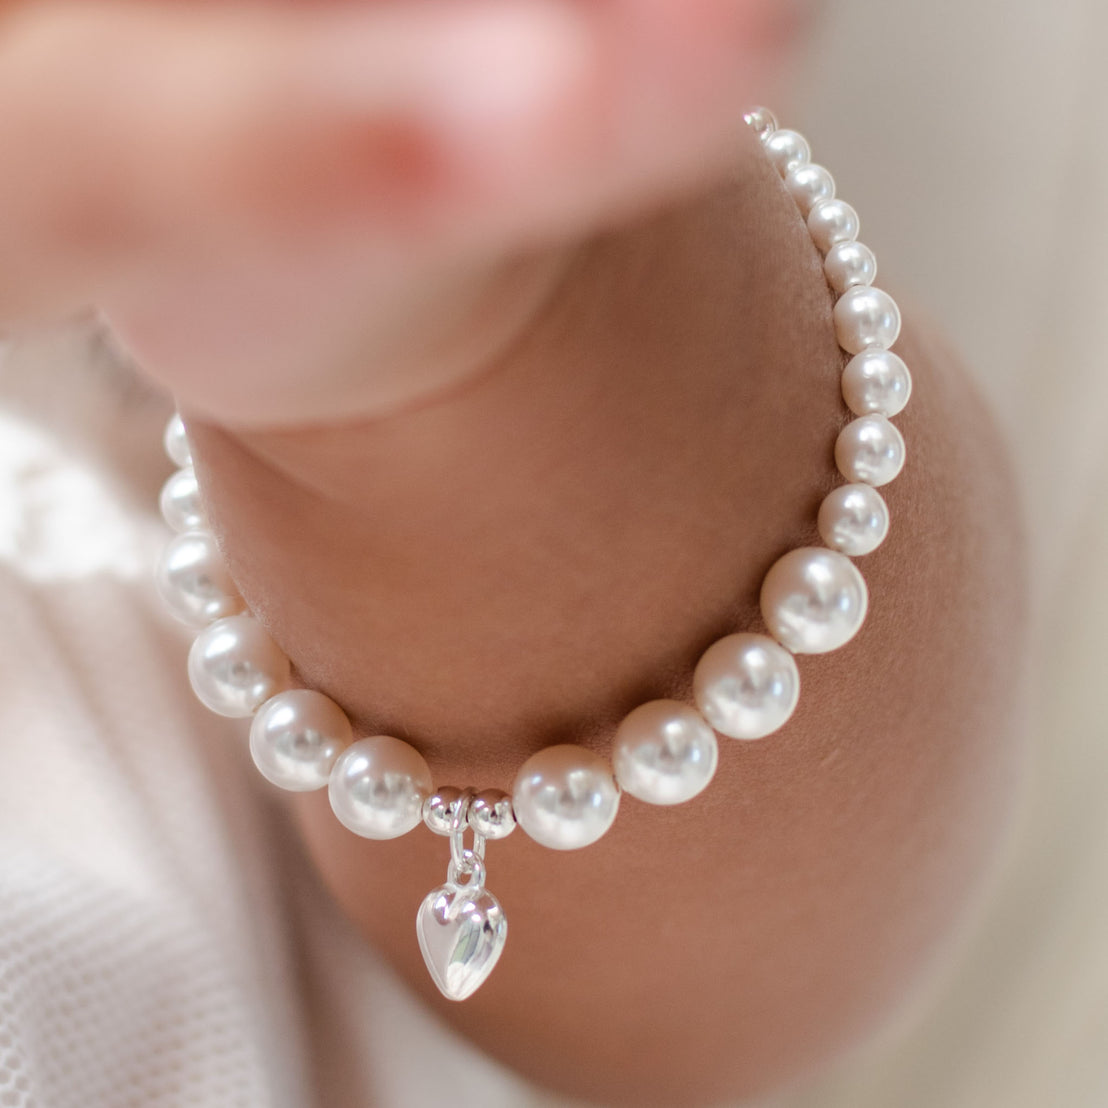 Close-up of a White Luster Pearl Bracelet with Silver Heart Charm worn around a baby's wrist, featuring large pearls, set against a soft, neutral background.